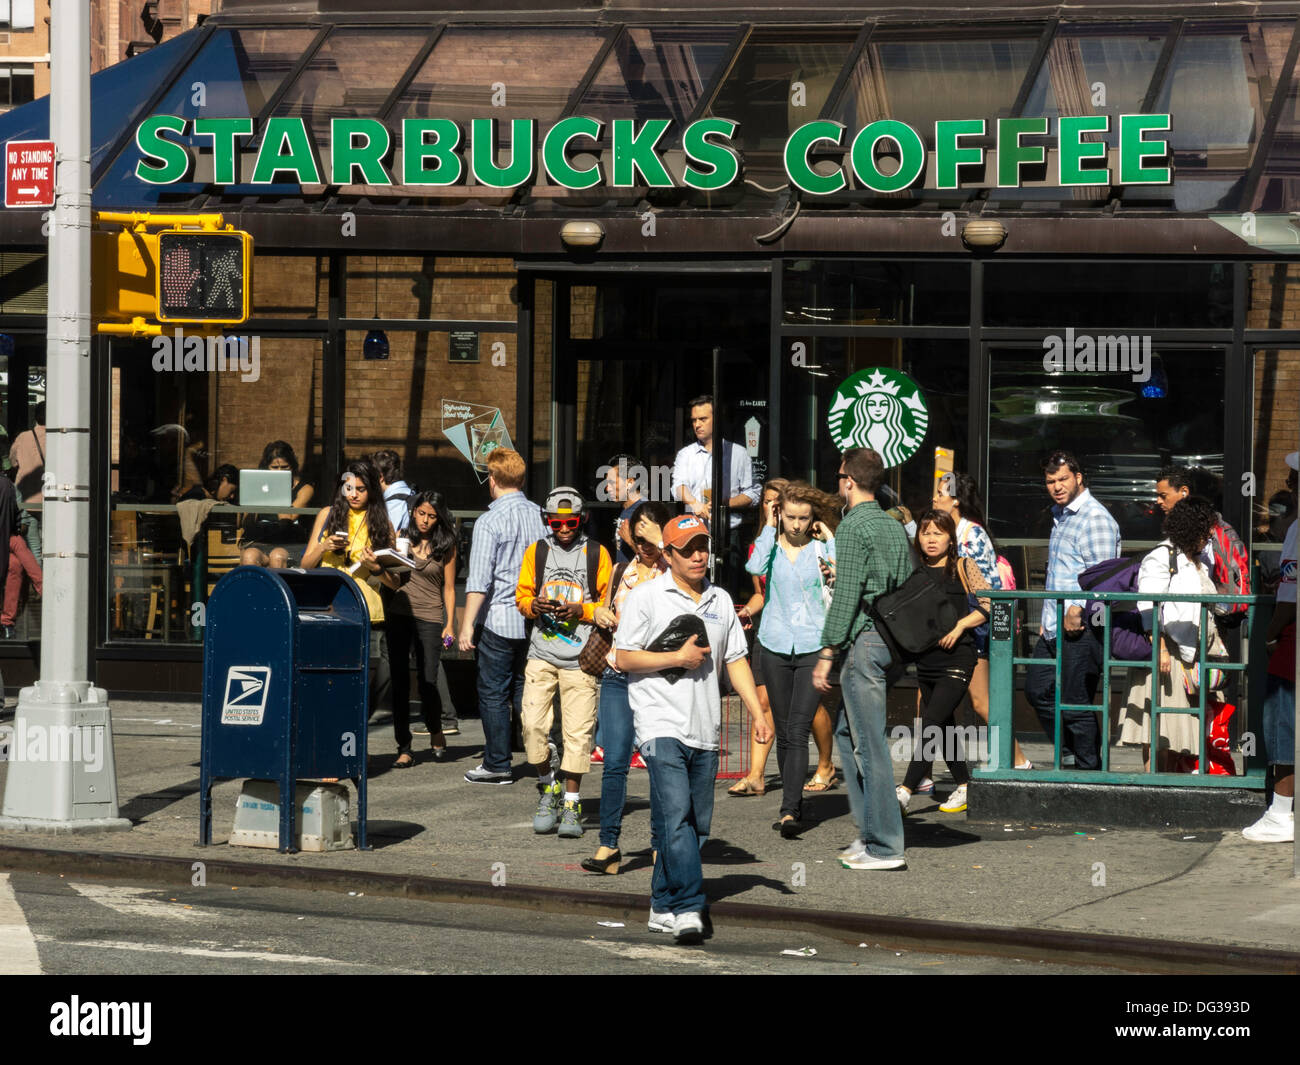 Starbucks Coffee Storefront at Astor Place, NYC Stock Photo